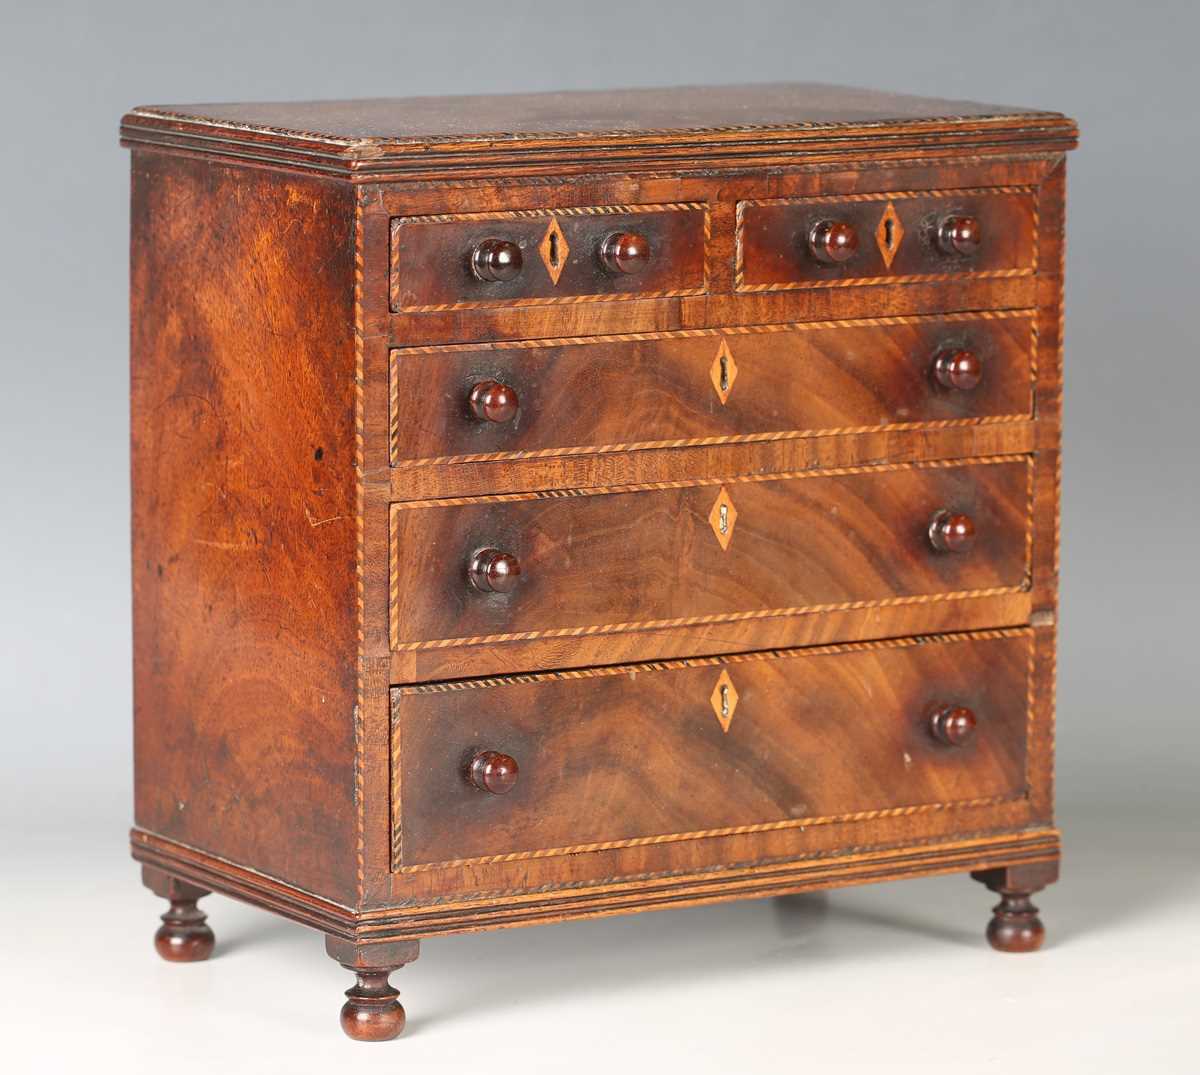 A George III mahogany table-top chest of drawers, possibly an apprentice piece, with overall chequer